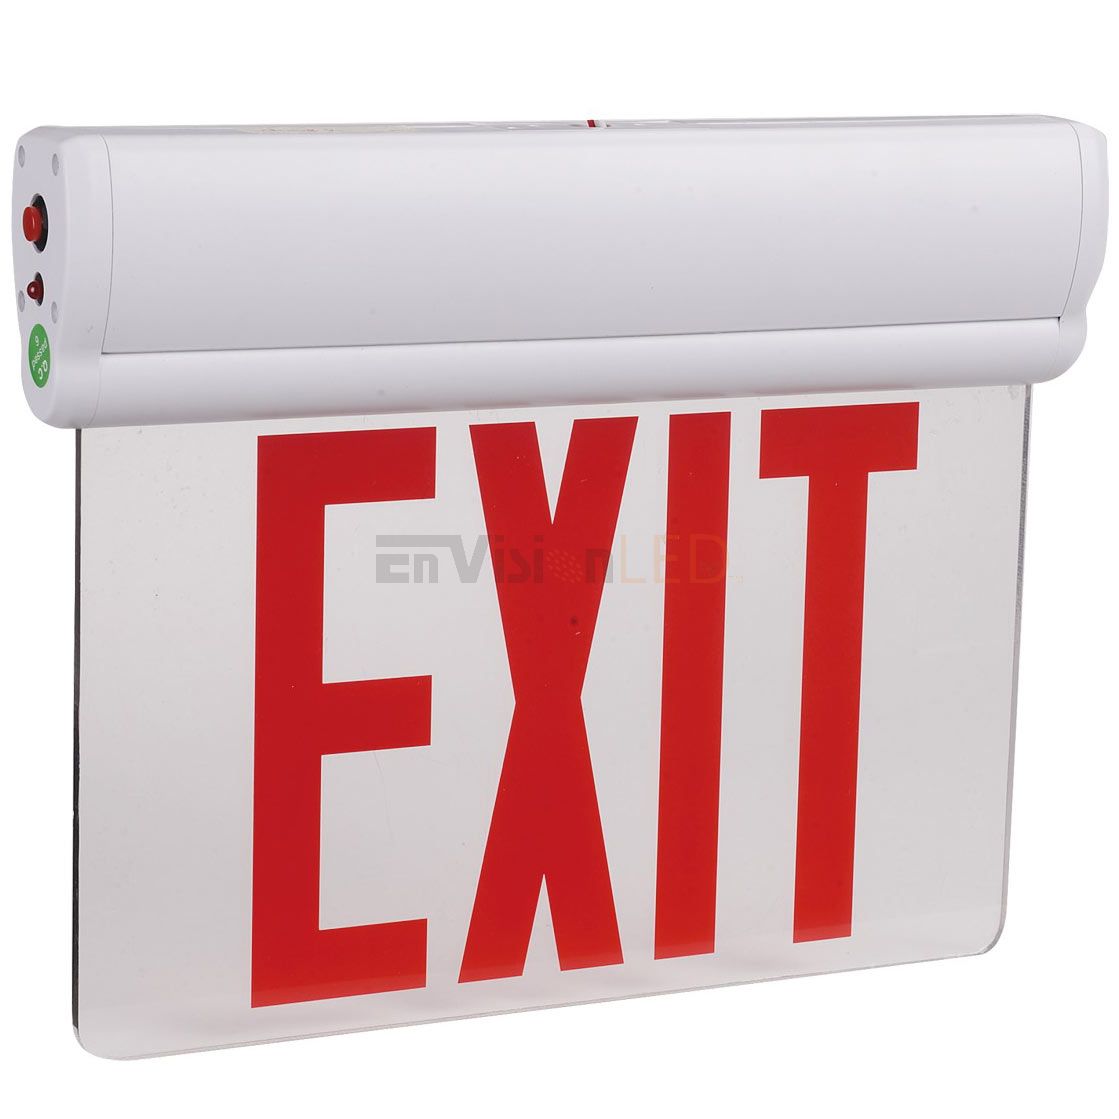 Envision LED Edge Lit Emergency Exit Sign (Single Sided), Red/Green - Sonic Electric